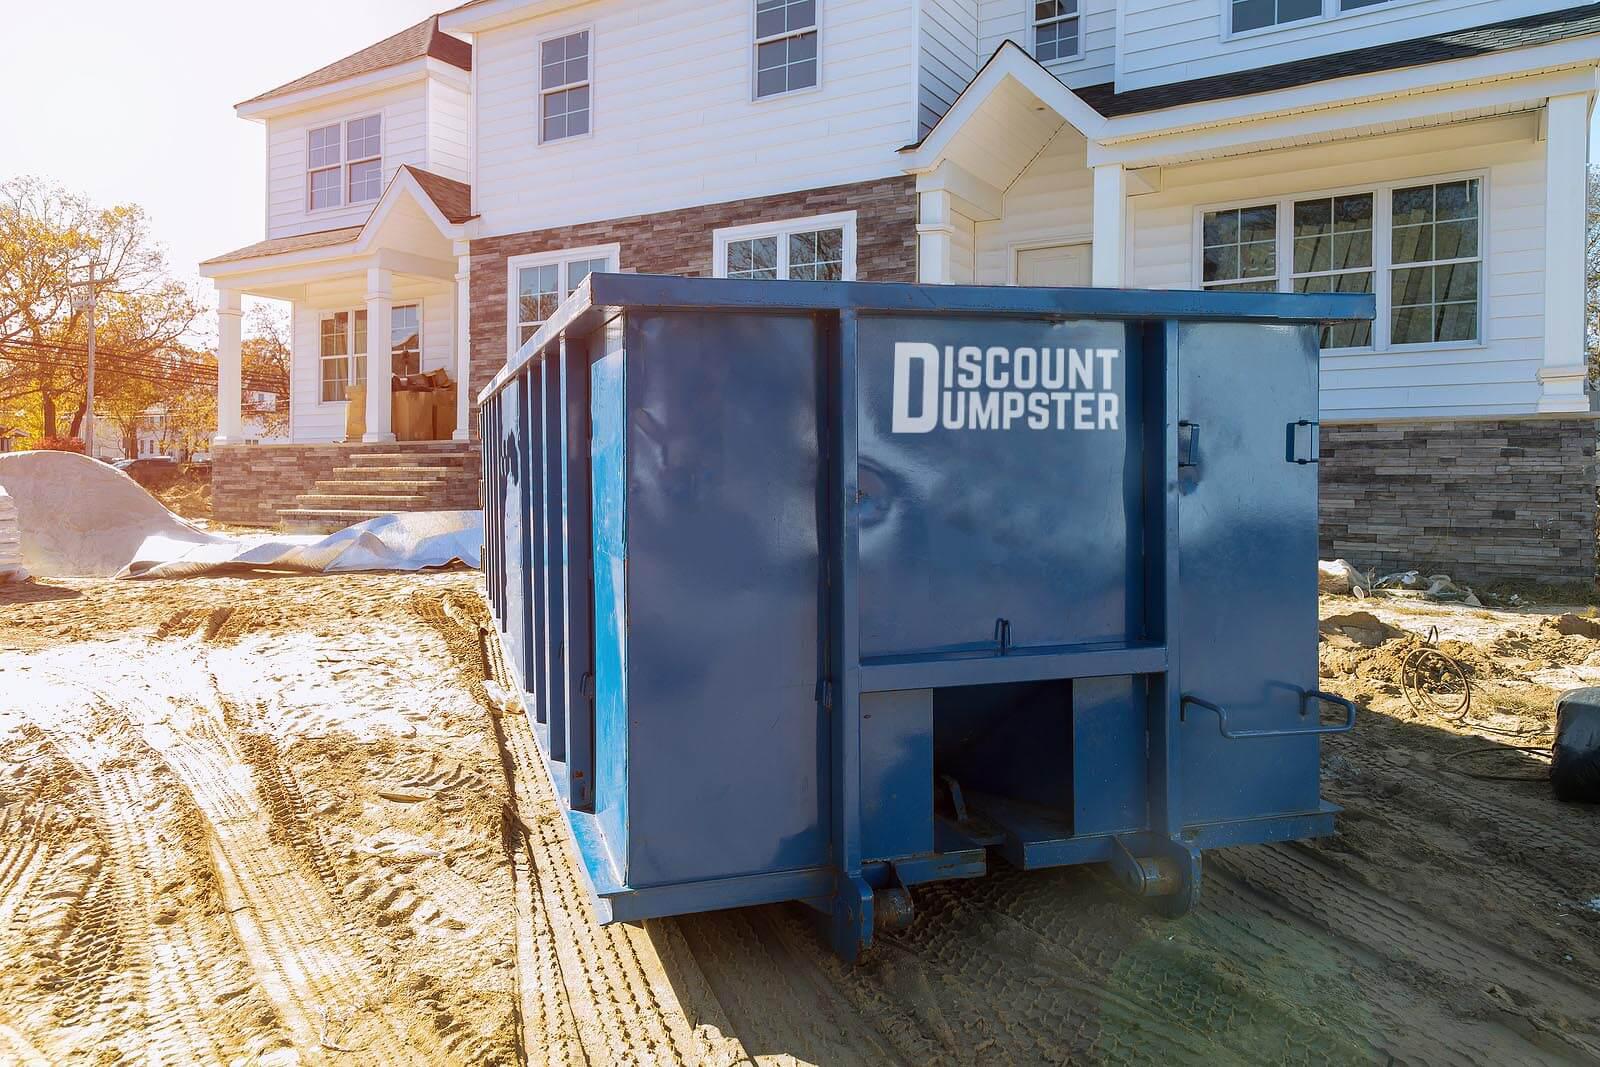 Discount dumpster is proud to serve the Denver co area for home renovation waste removal